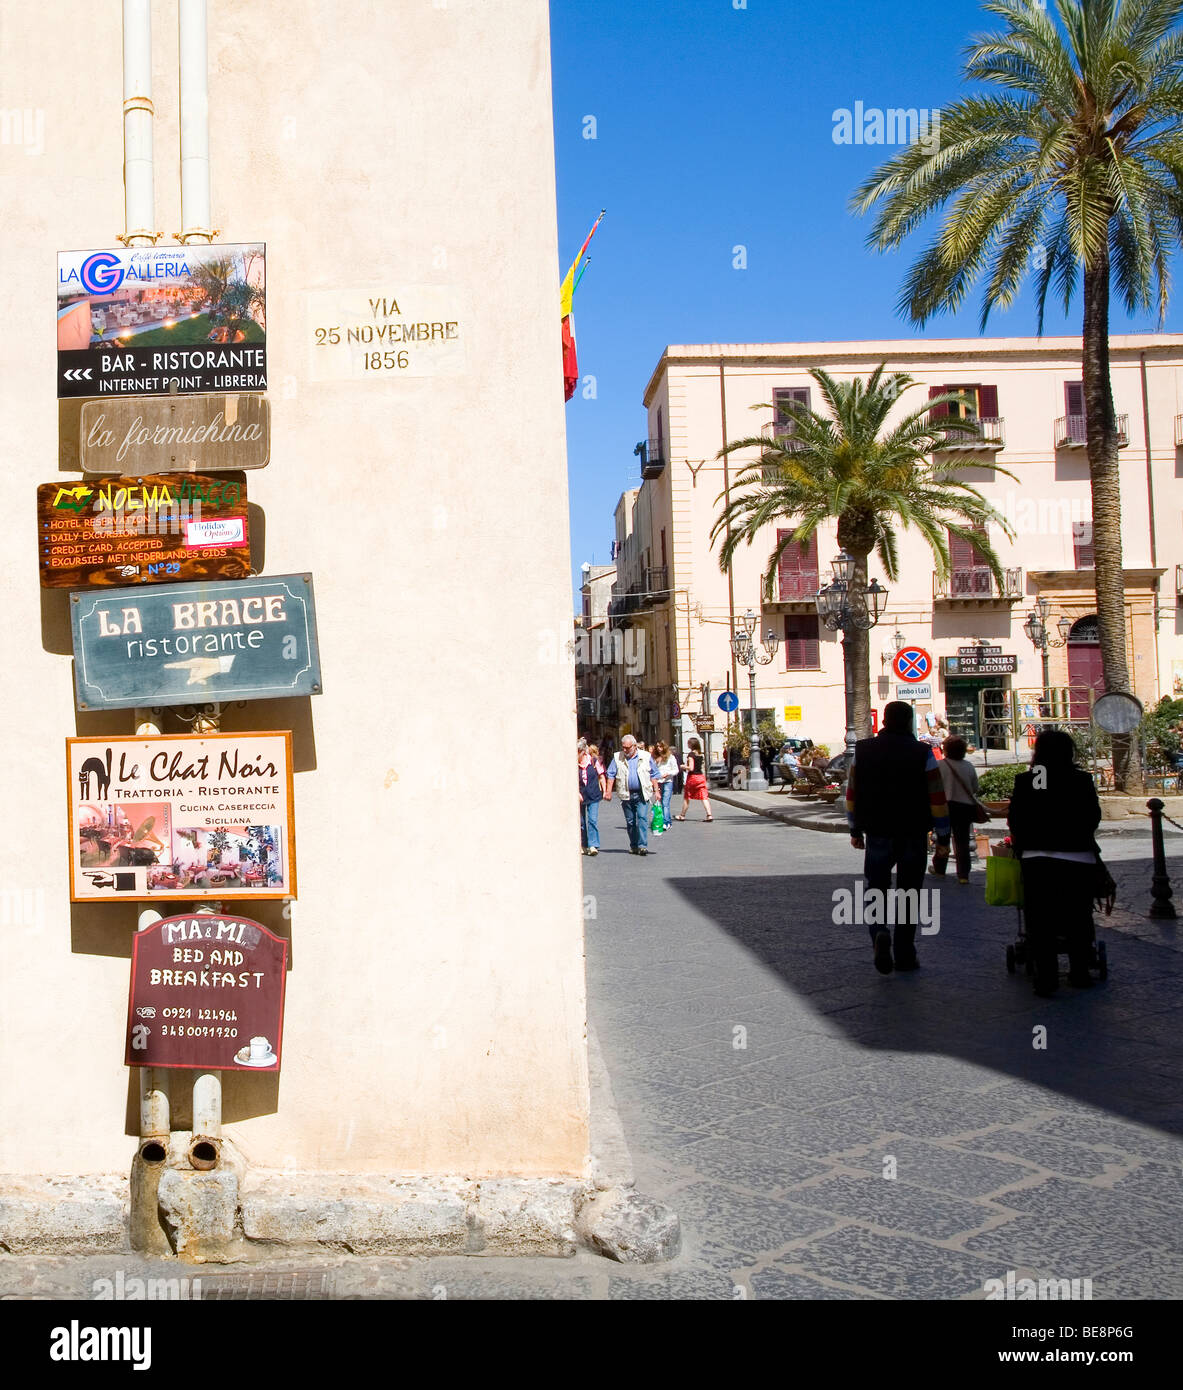 Signs on Via 25 Novembre, a busy street in the town of Cefalu on the island of Sicily, Italy Stock Photo